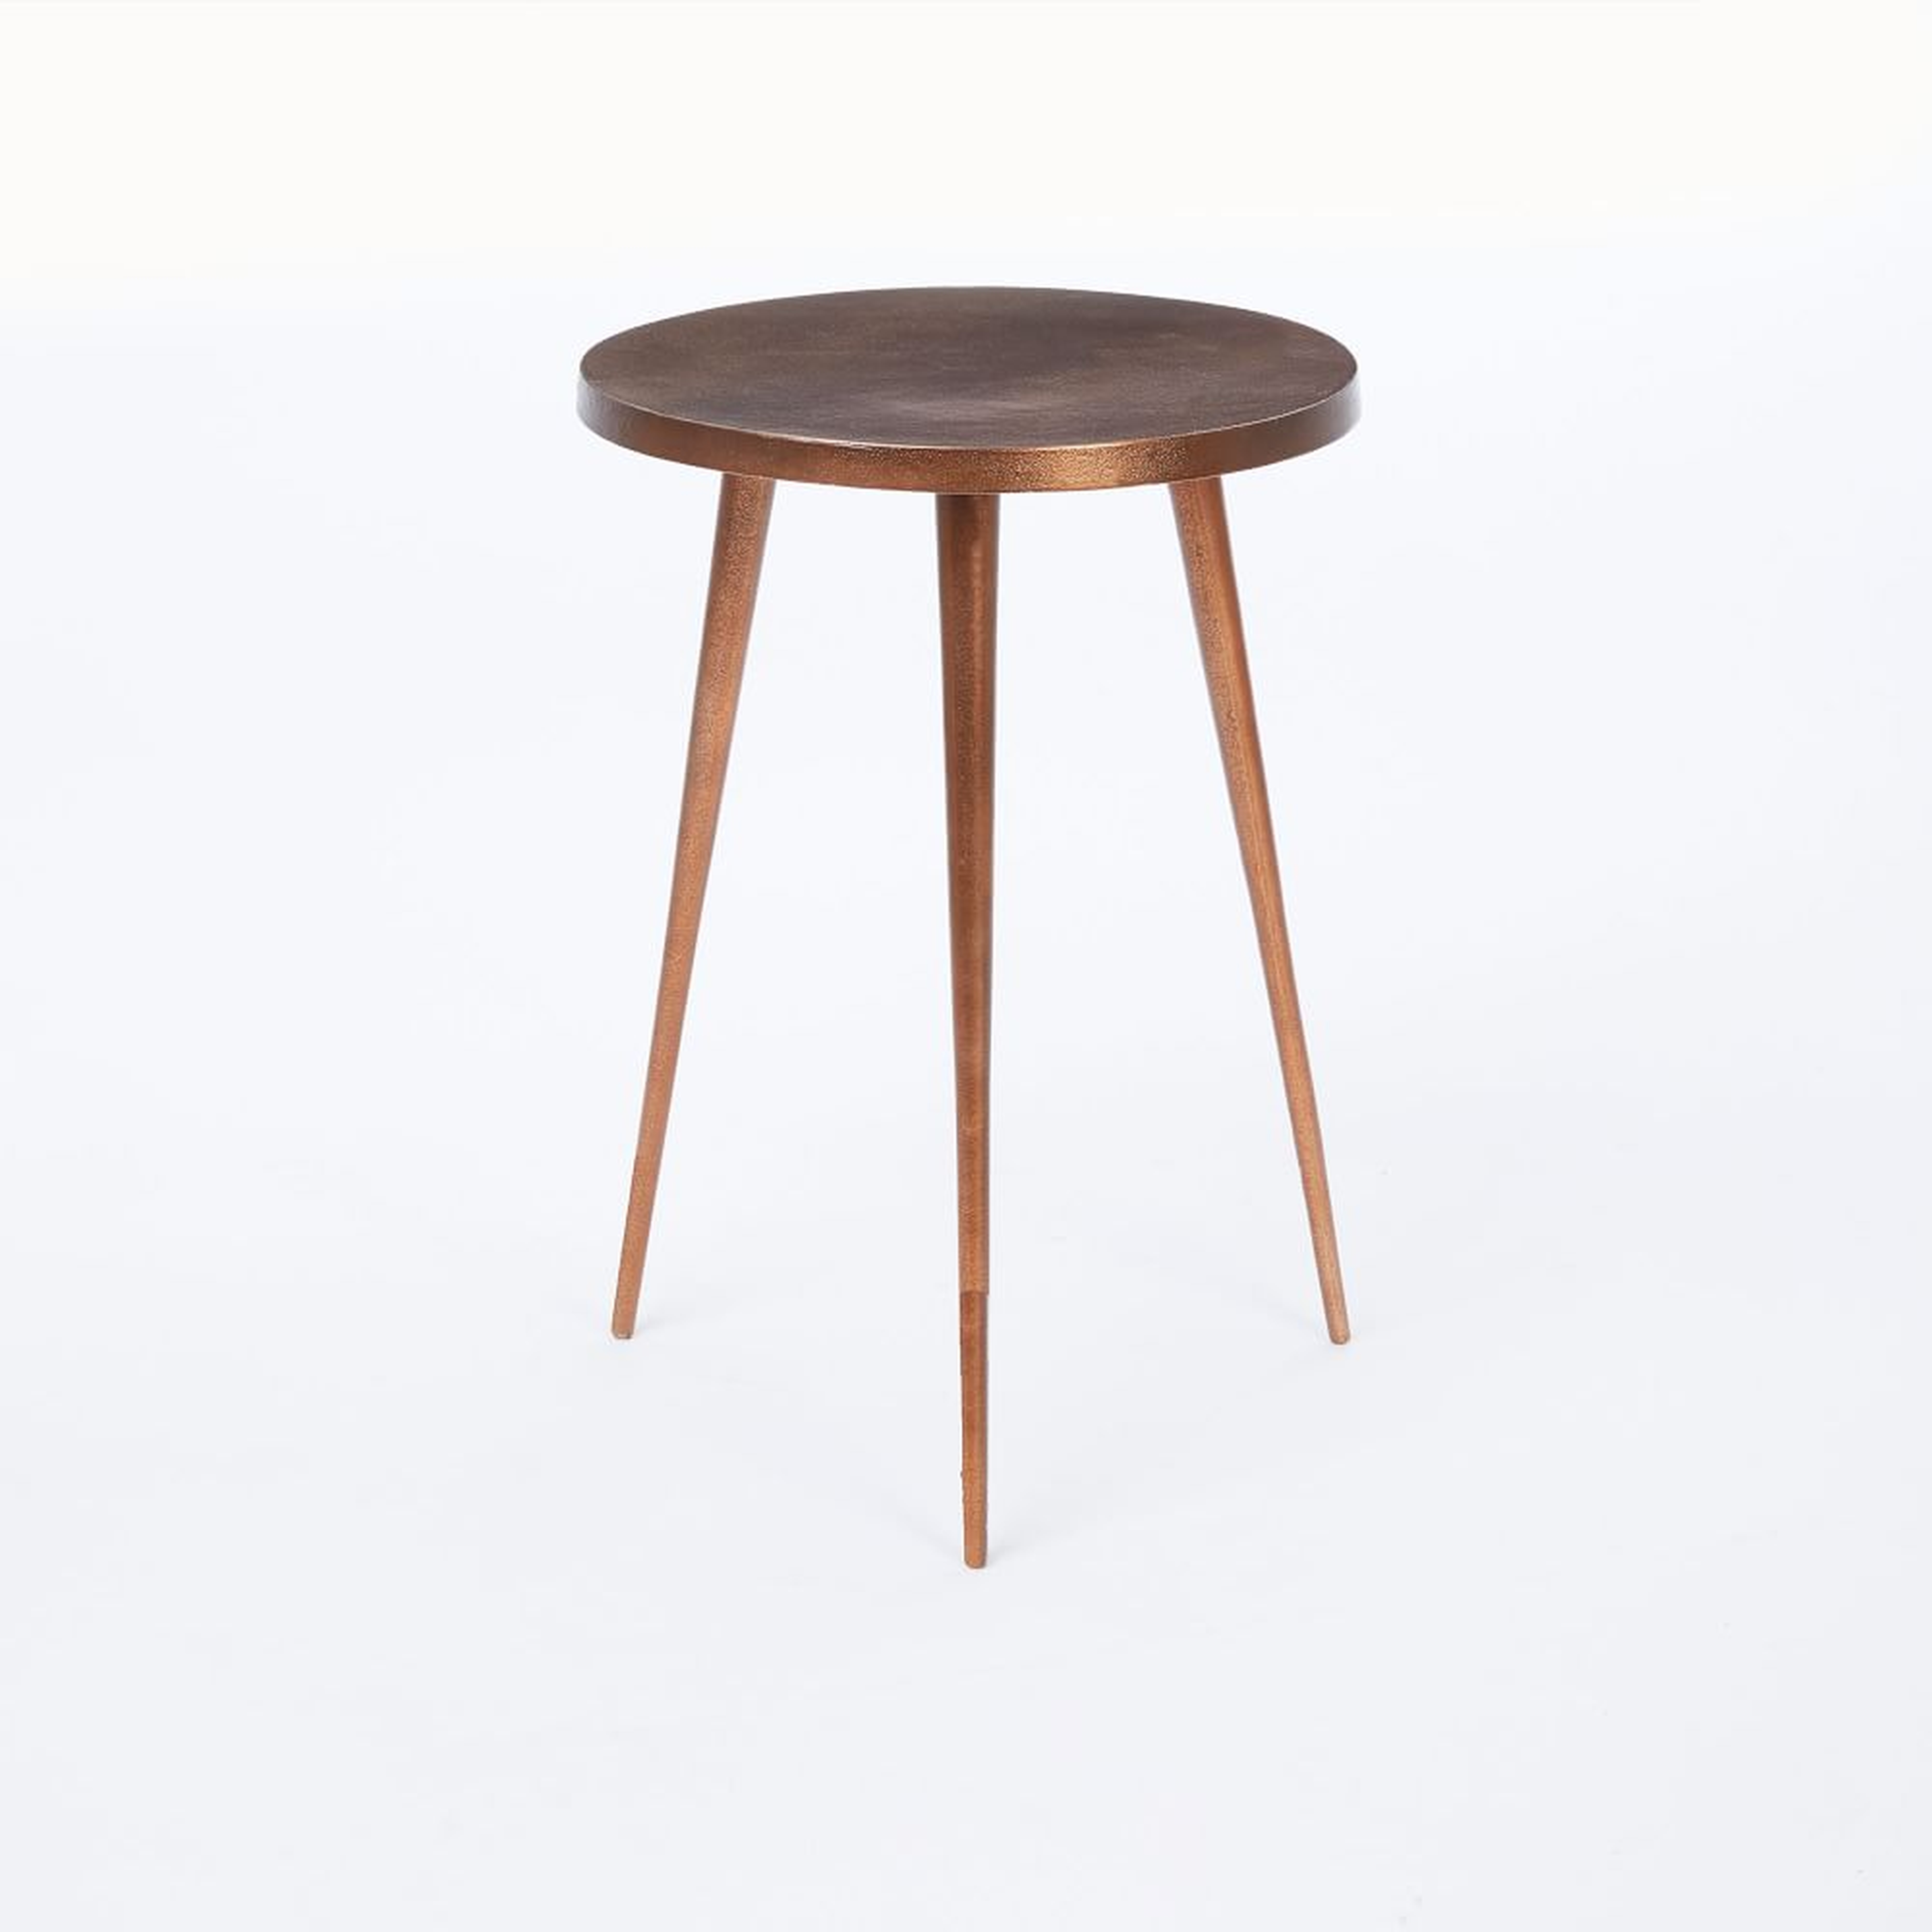 Casted 15" Side Table, Copper - West Elm